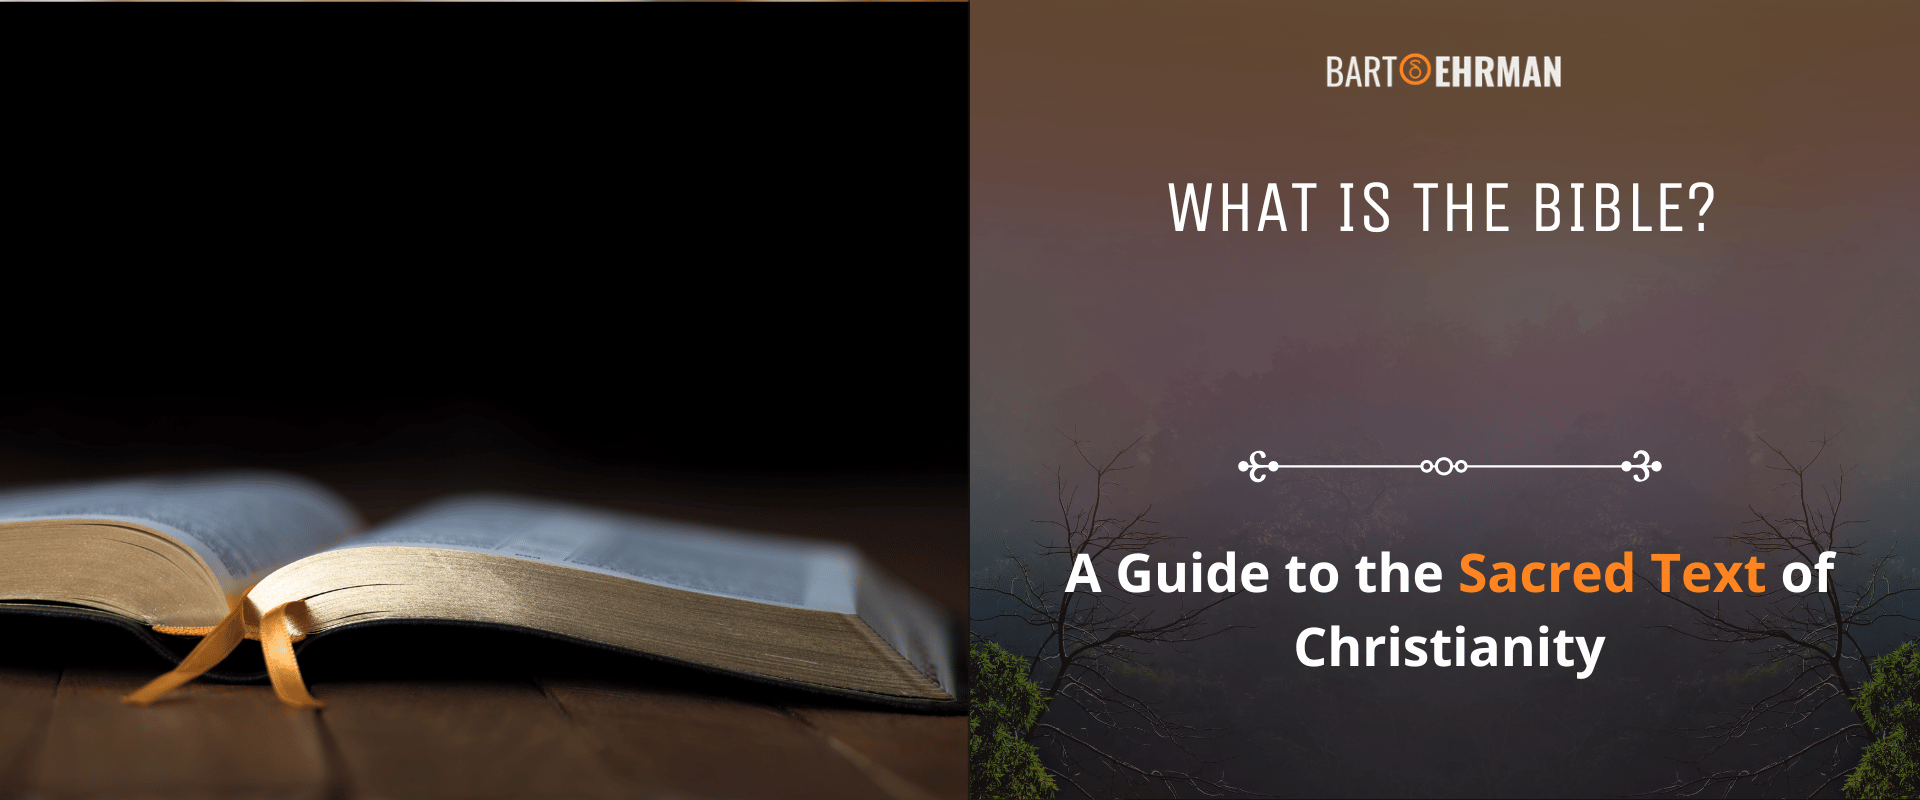 What is the Bible - A Guide to the Sacred Text of Christianity